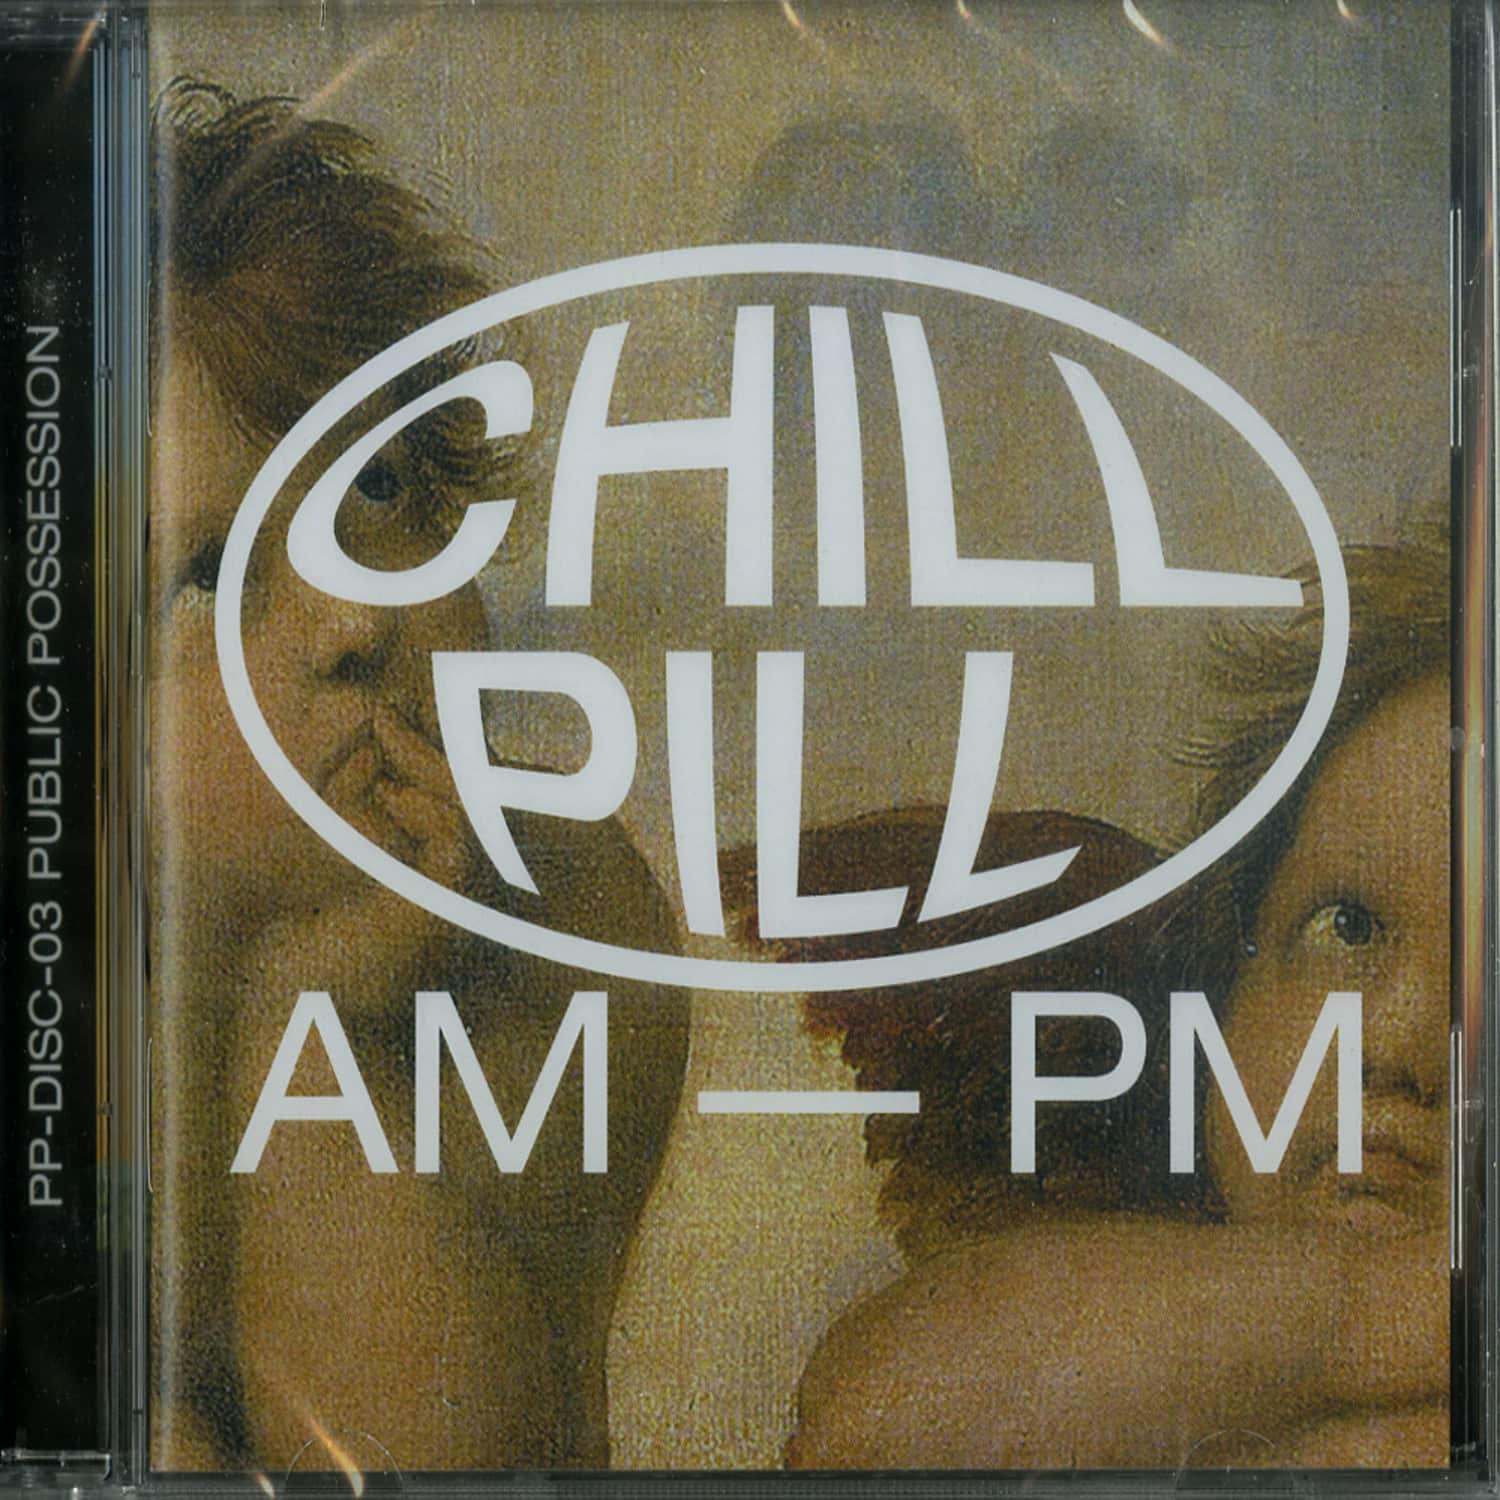 V/A Mixed by Andras - CHILL PILL II 